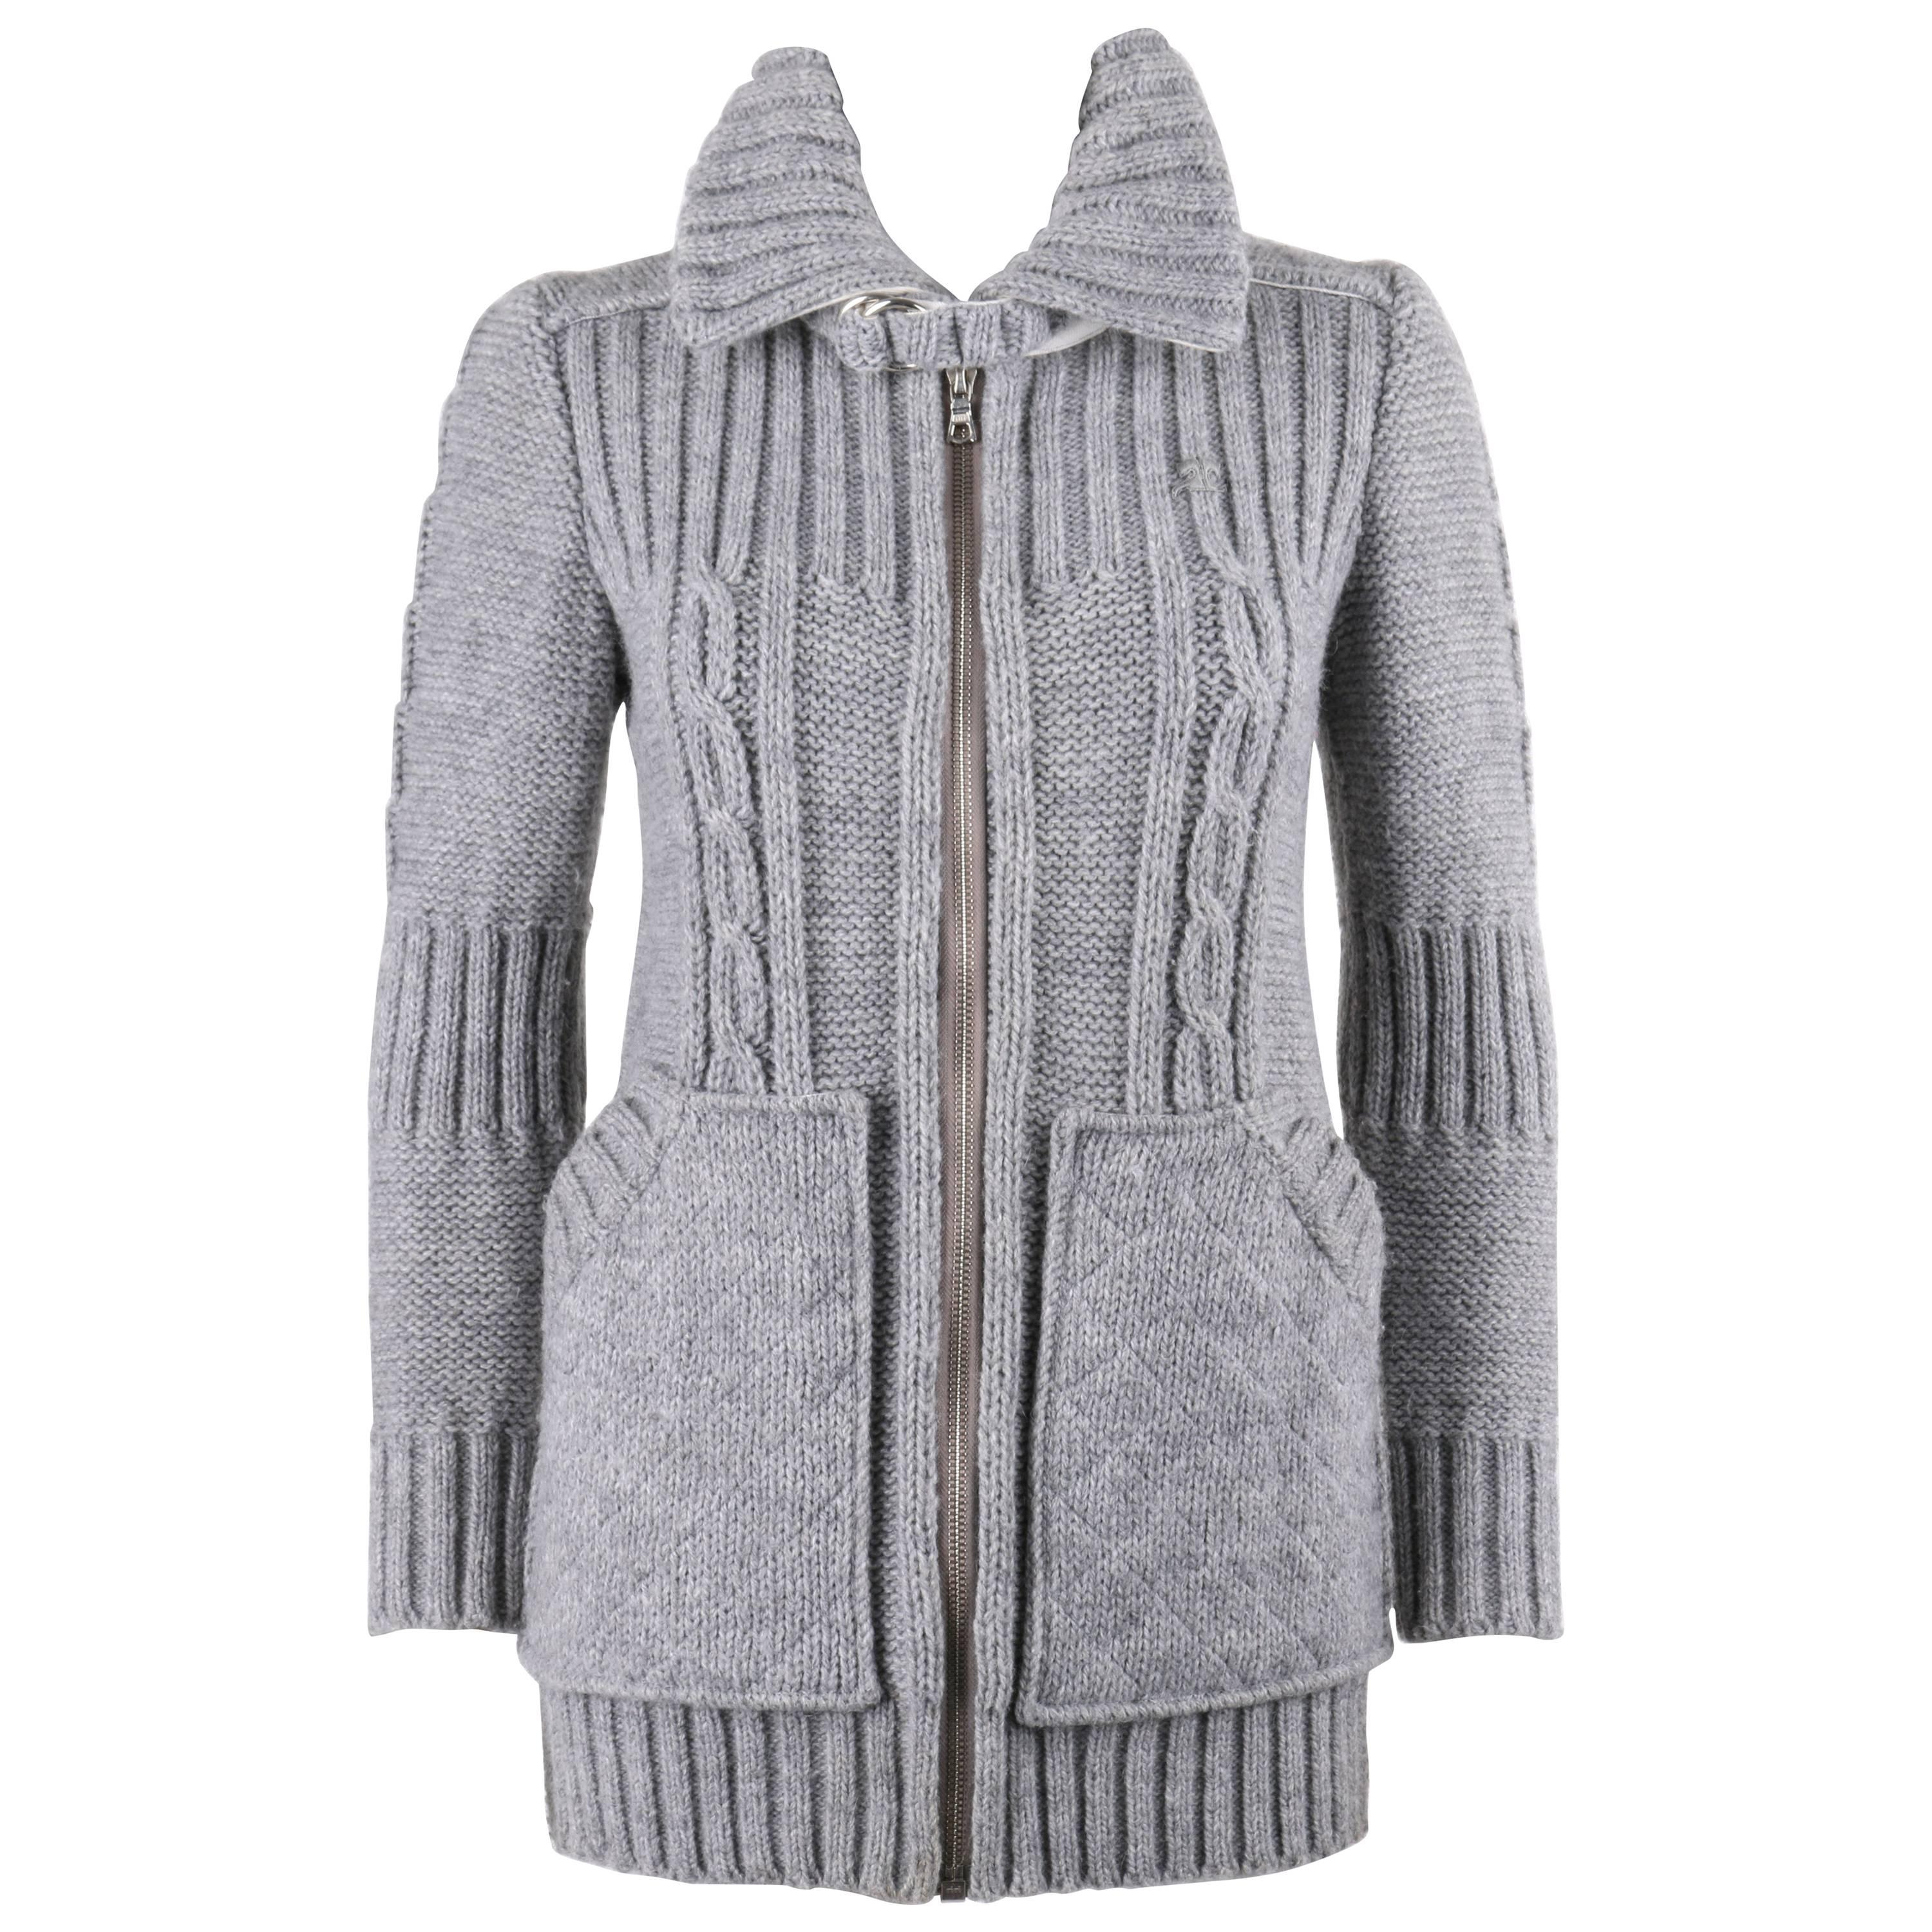 COURREGES c.1970's Gray Chunky Cable Knit Wool Zip Up Sweater Jacket